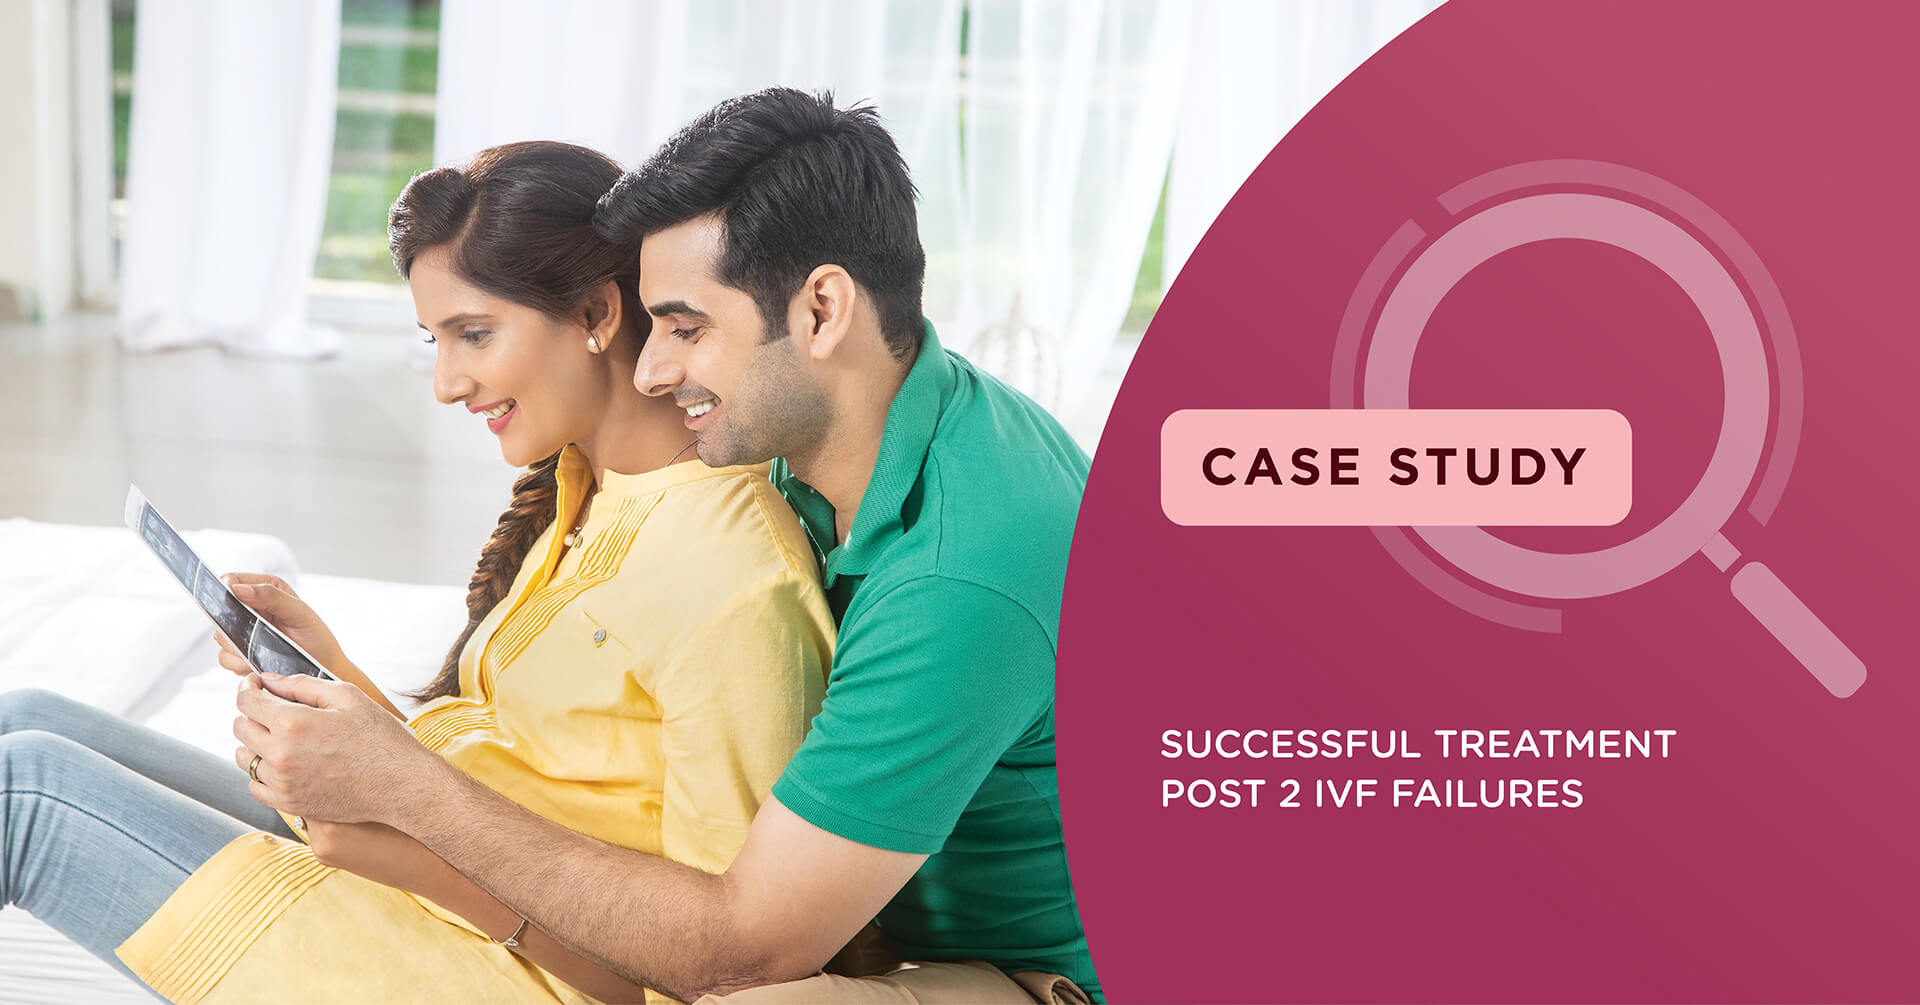 Successful IVF treatment after ruling out any fertility issue via ERA test and Hysteroscopy procedure